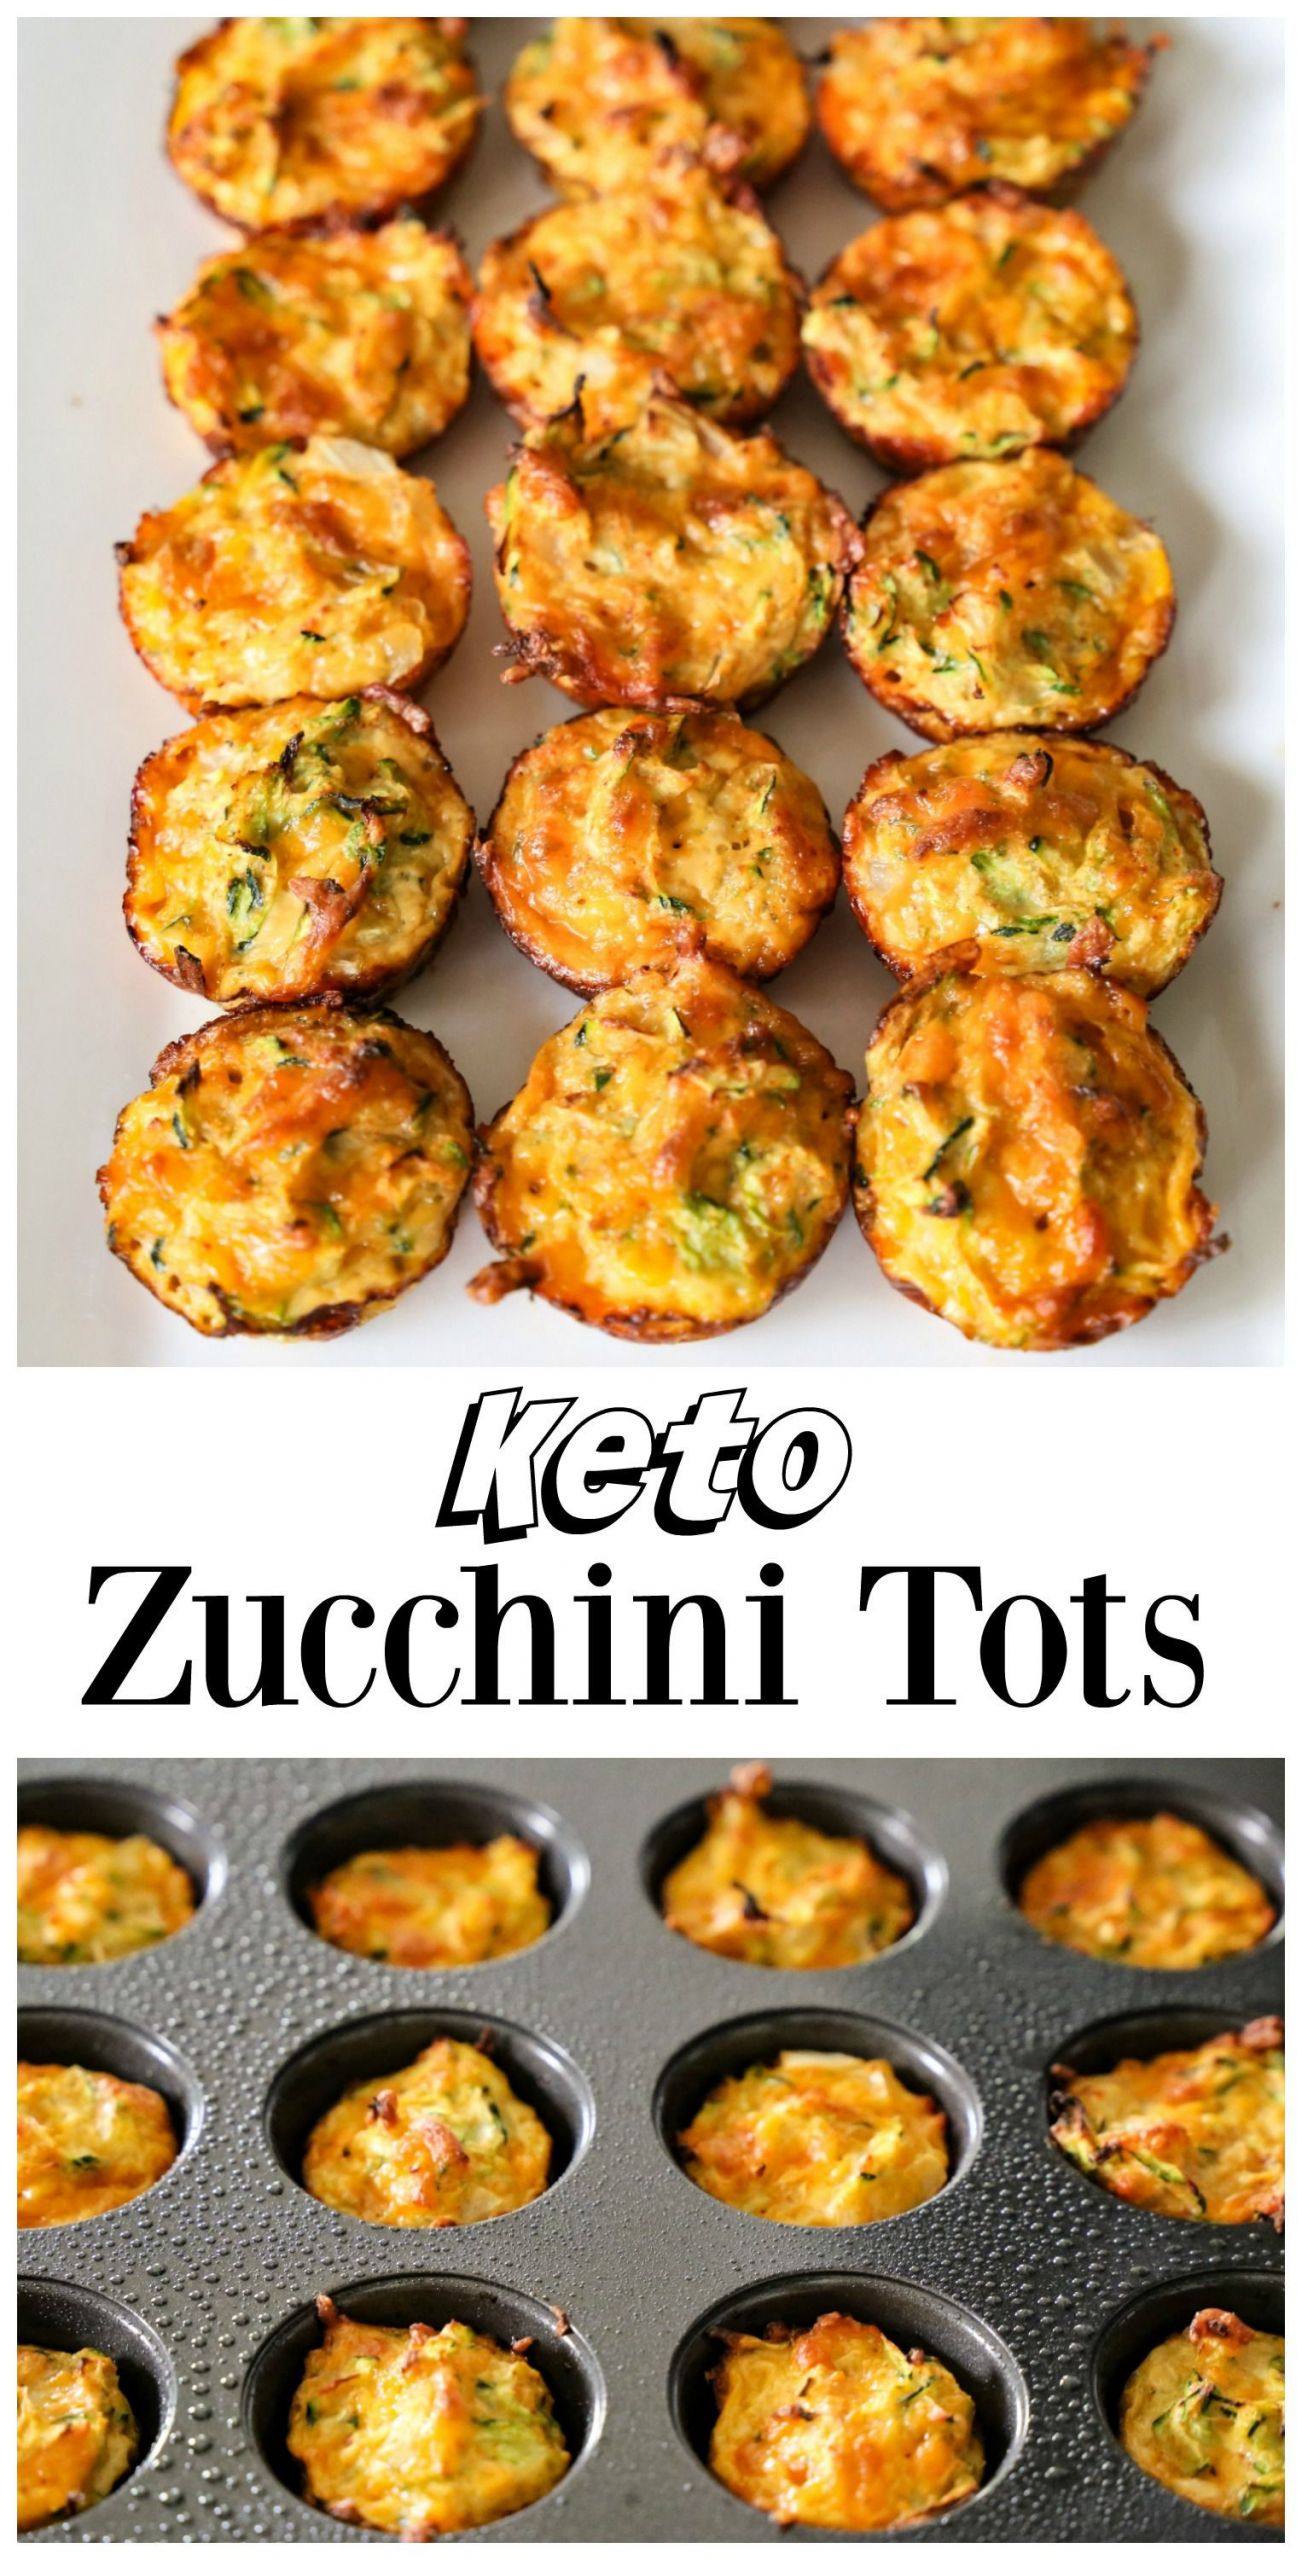 Easy Keto Zucchini Recipes
 These simple keto Zucchini Tots make a great low carb